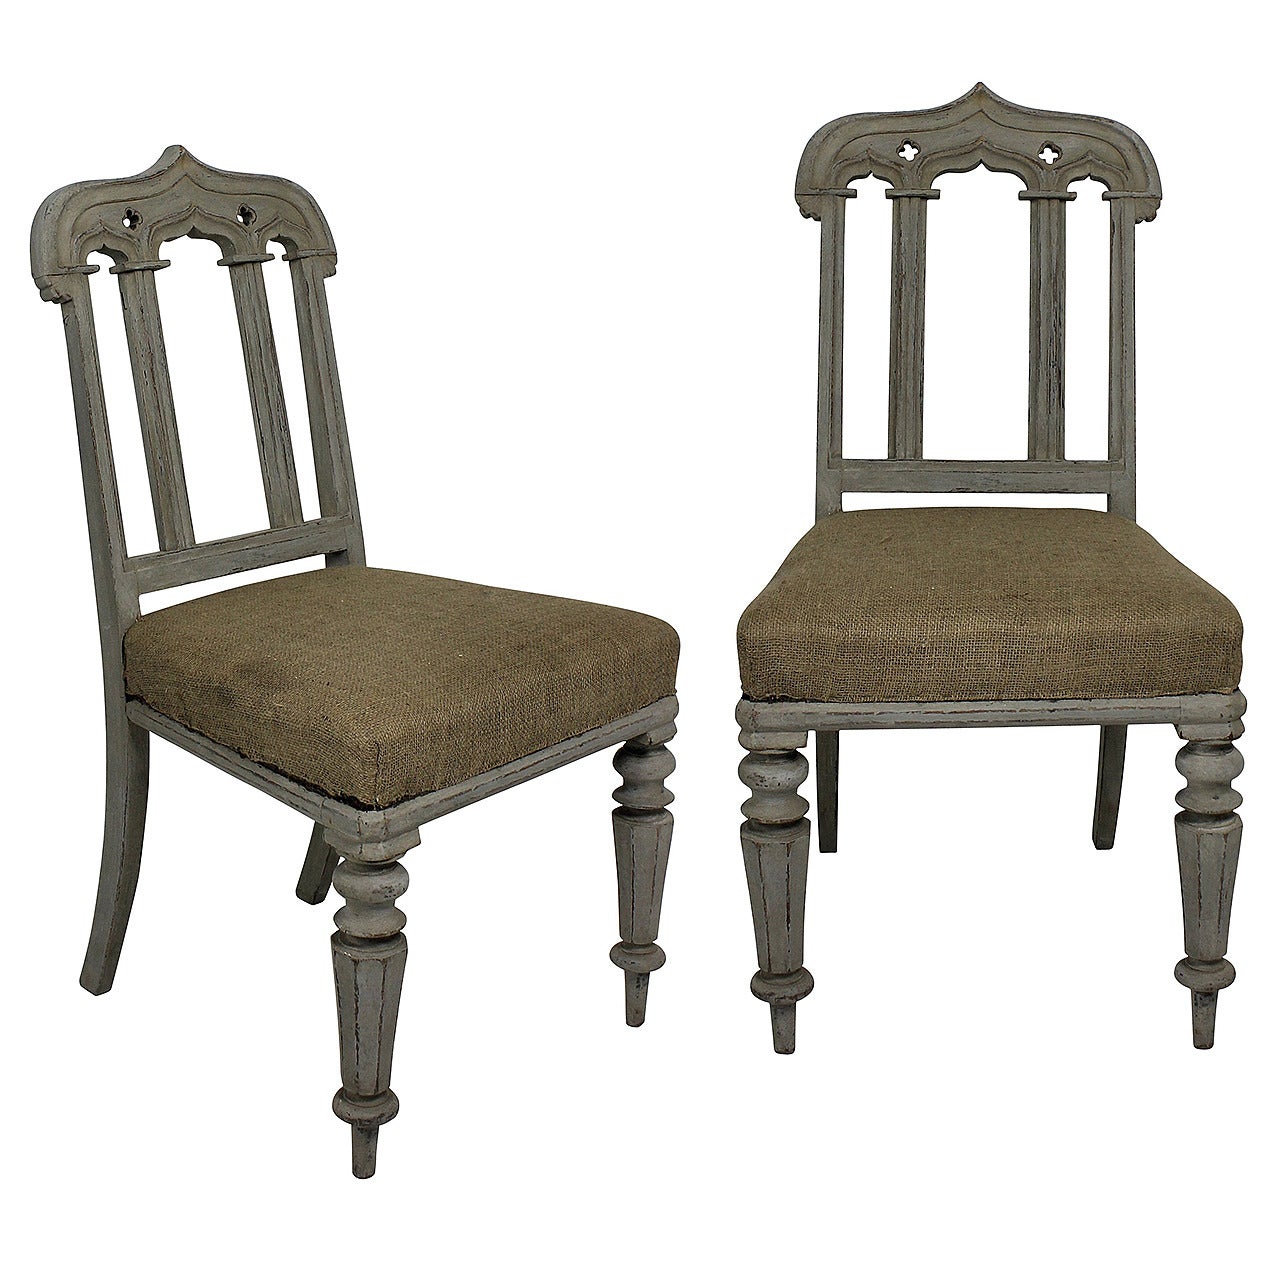 Pair of English Gothic Painted Chairs